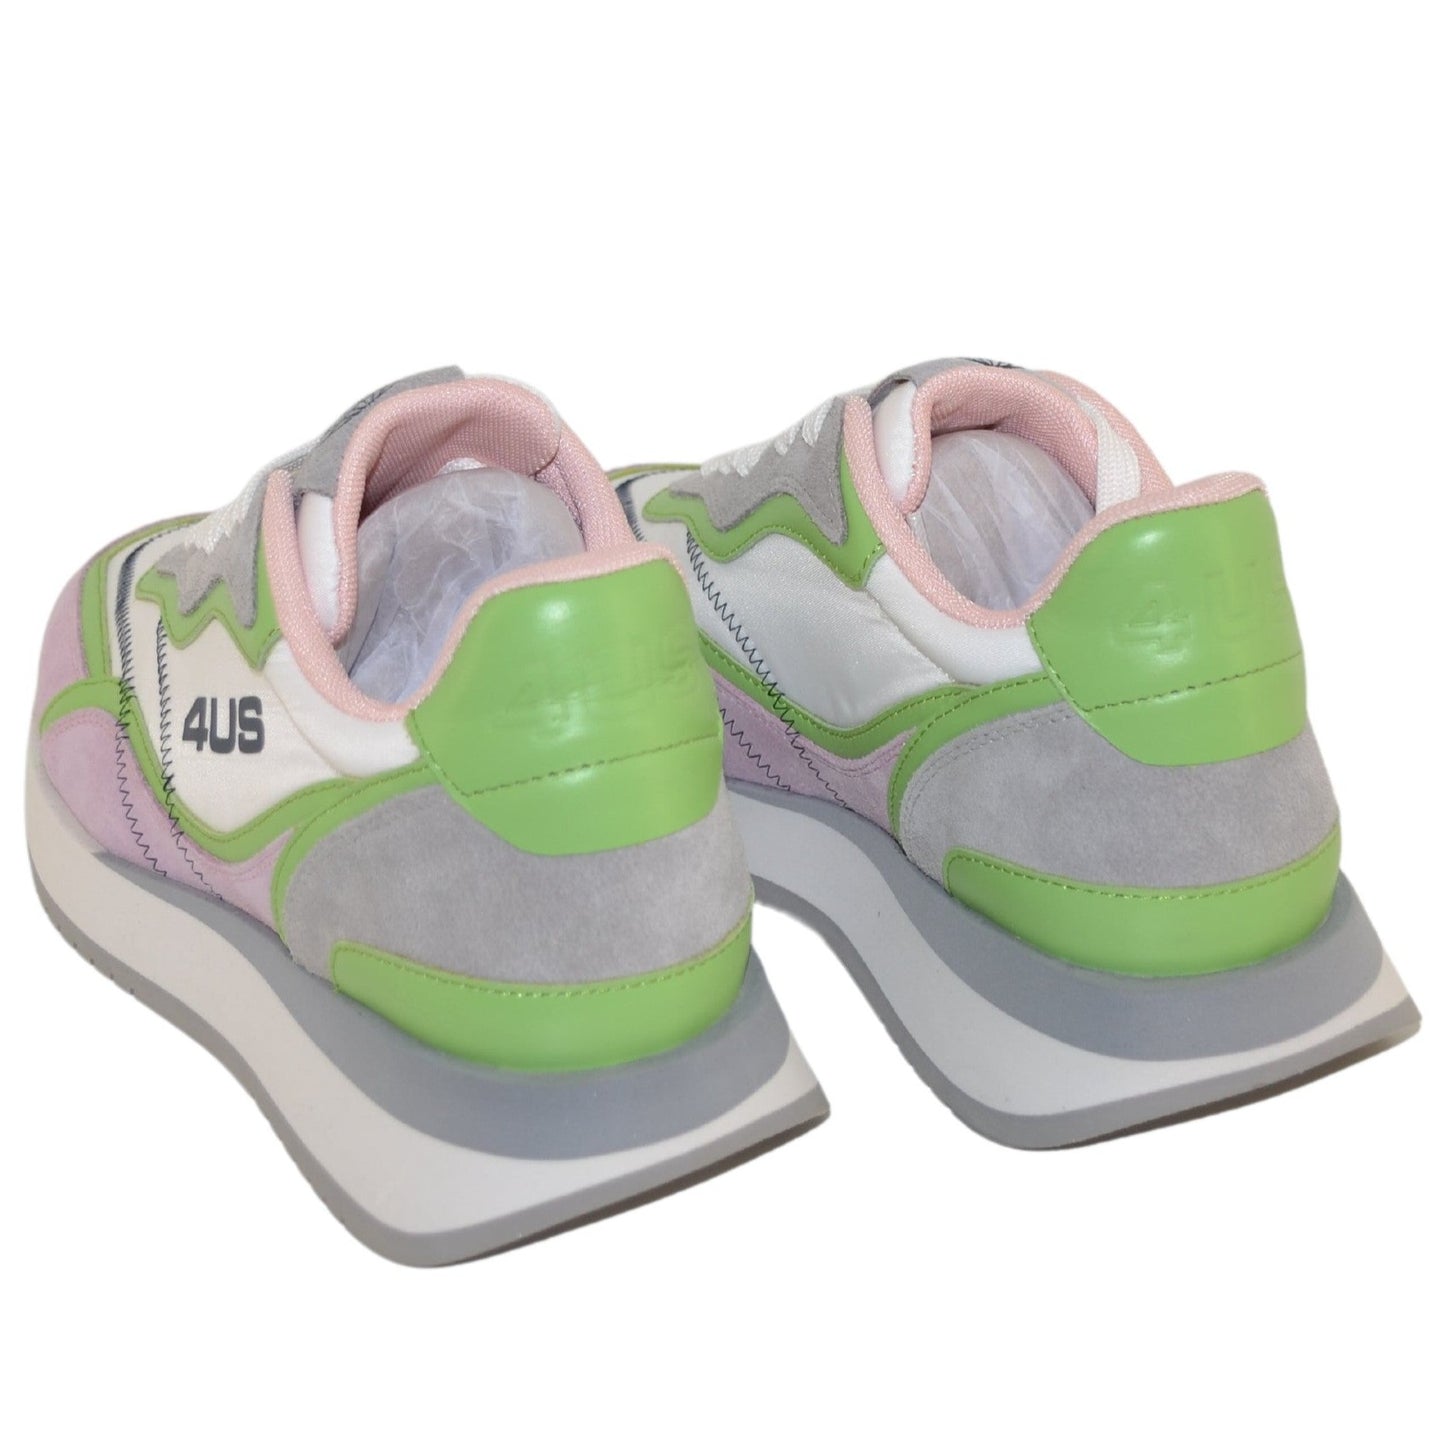 Sneakers Cesare Paciotti 4us white fabric rose and green leather